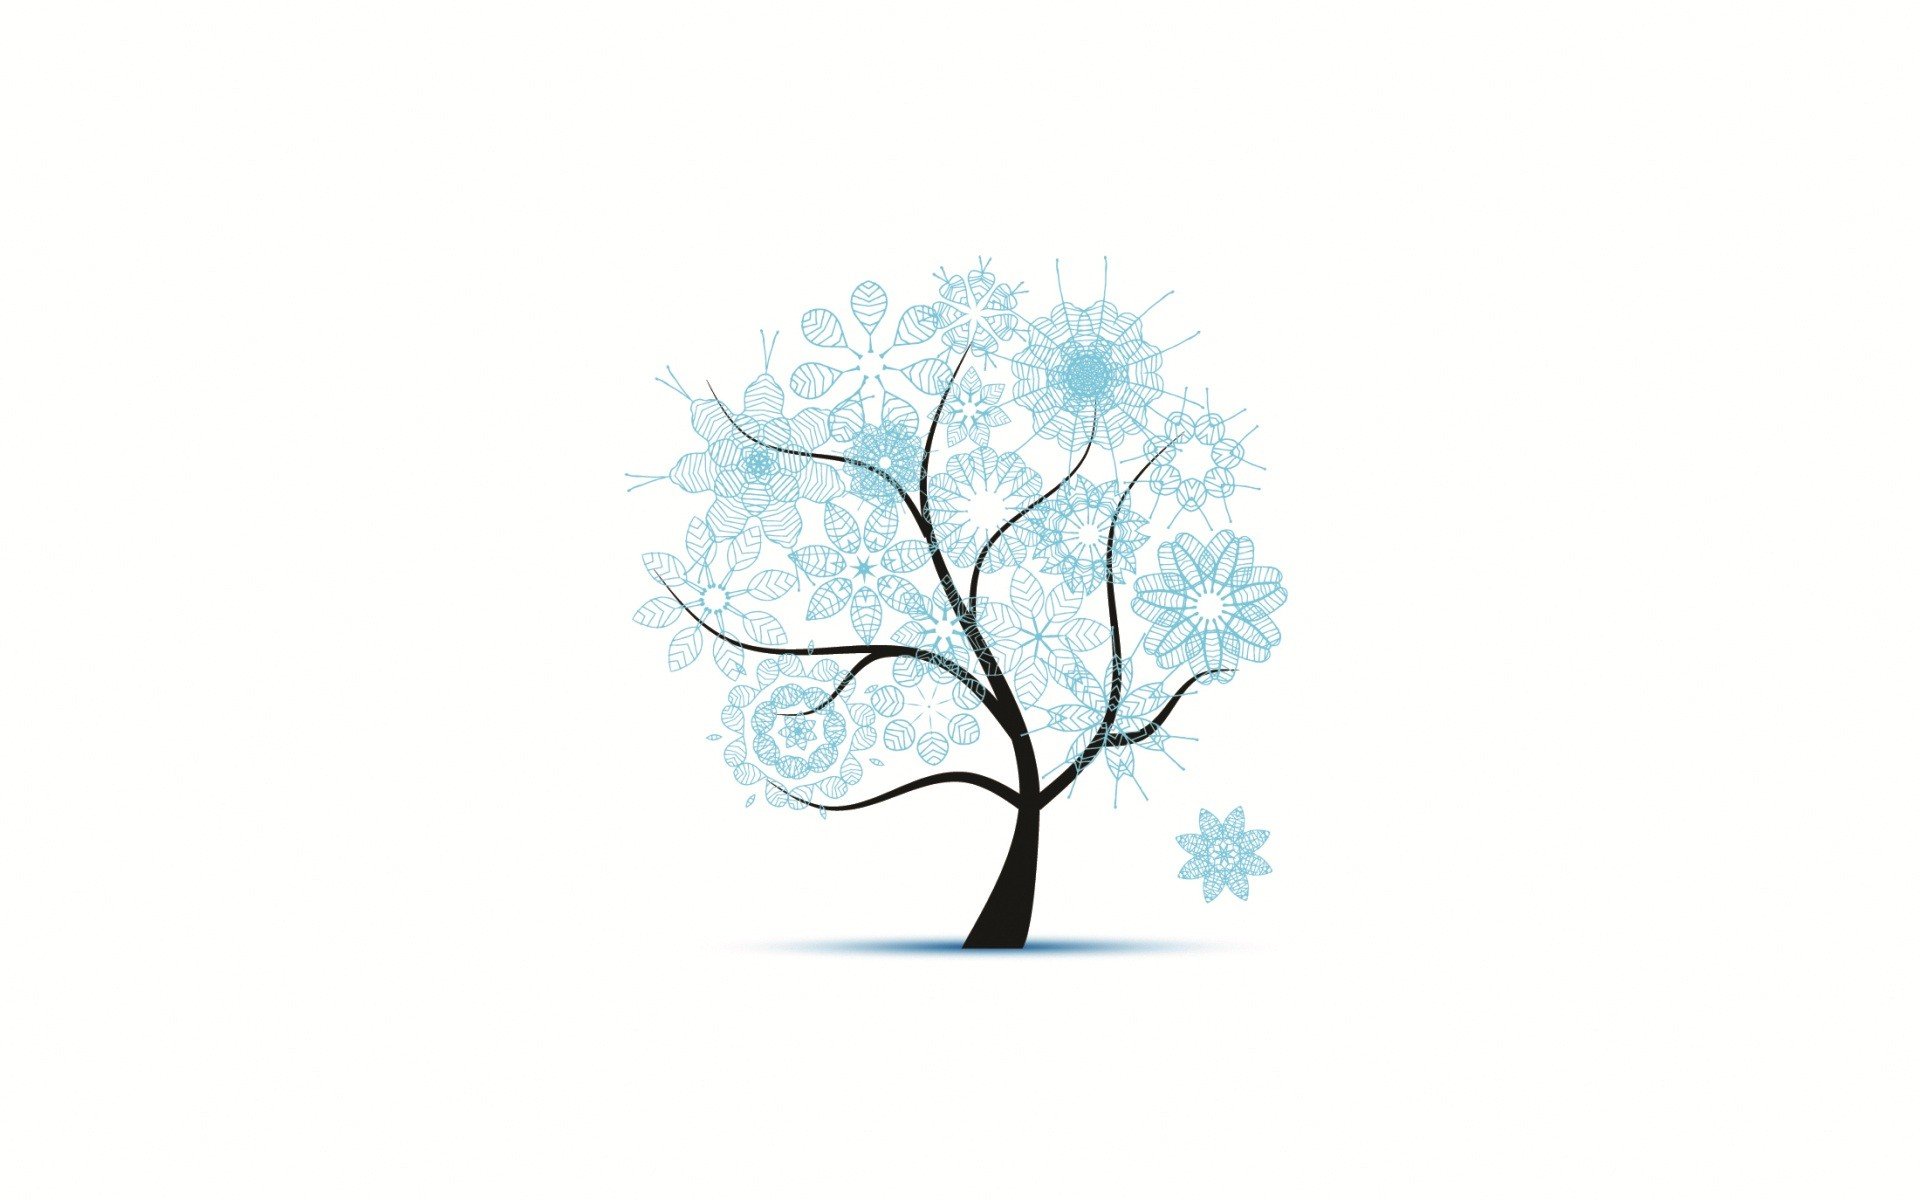 snow, Minimalistic, Trees, Simple, Background, White, Background Wallpaper